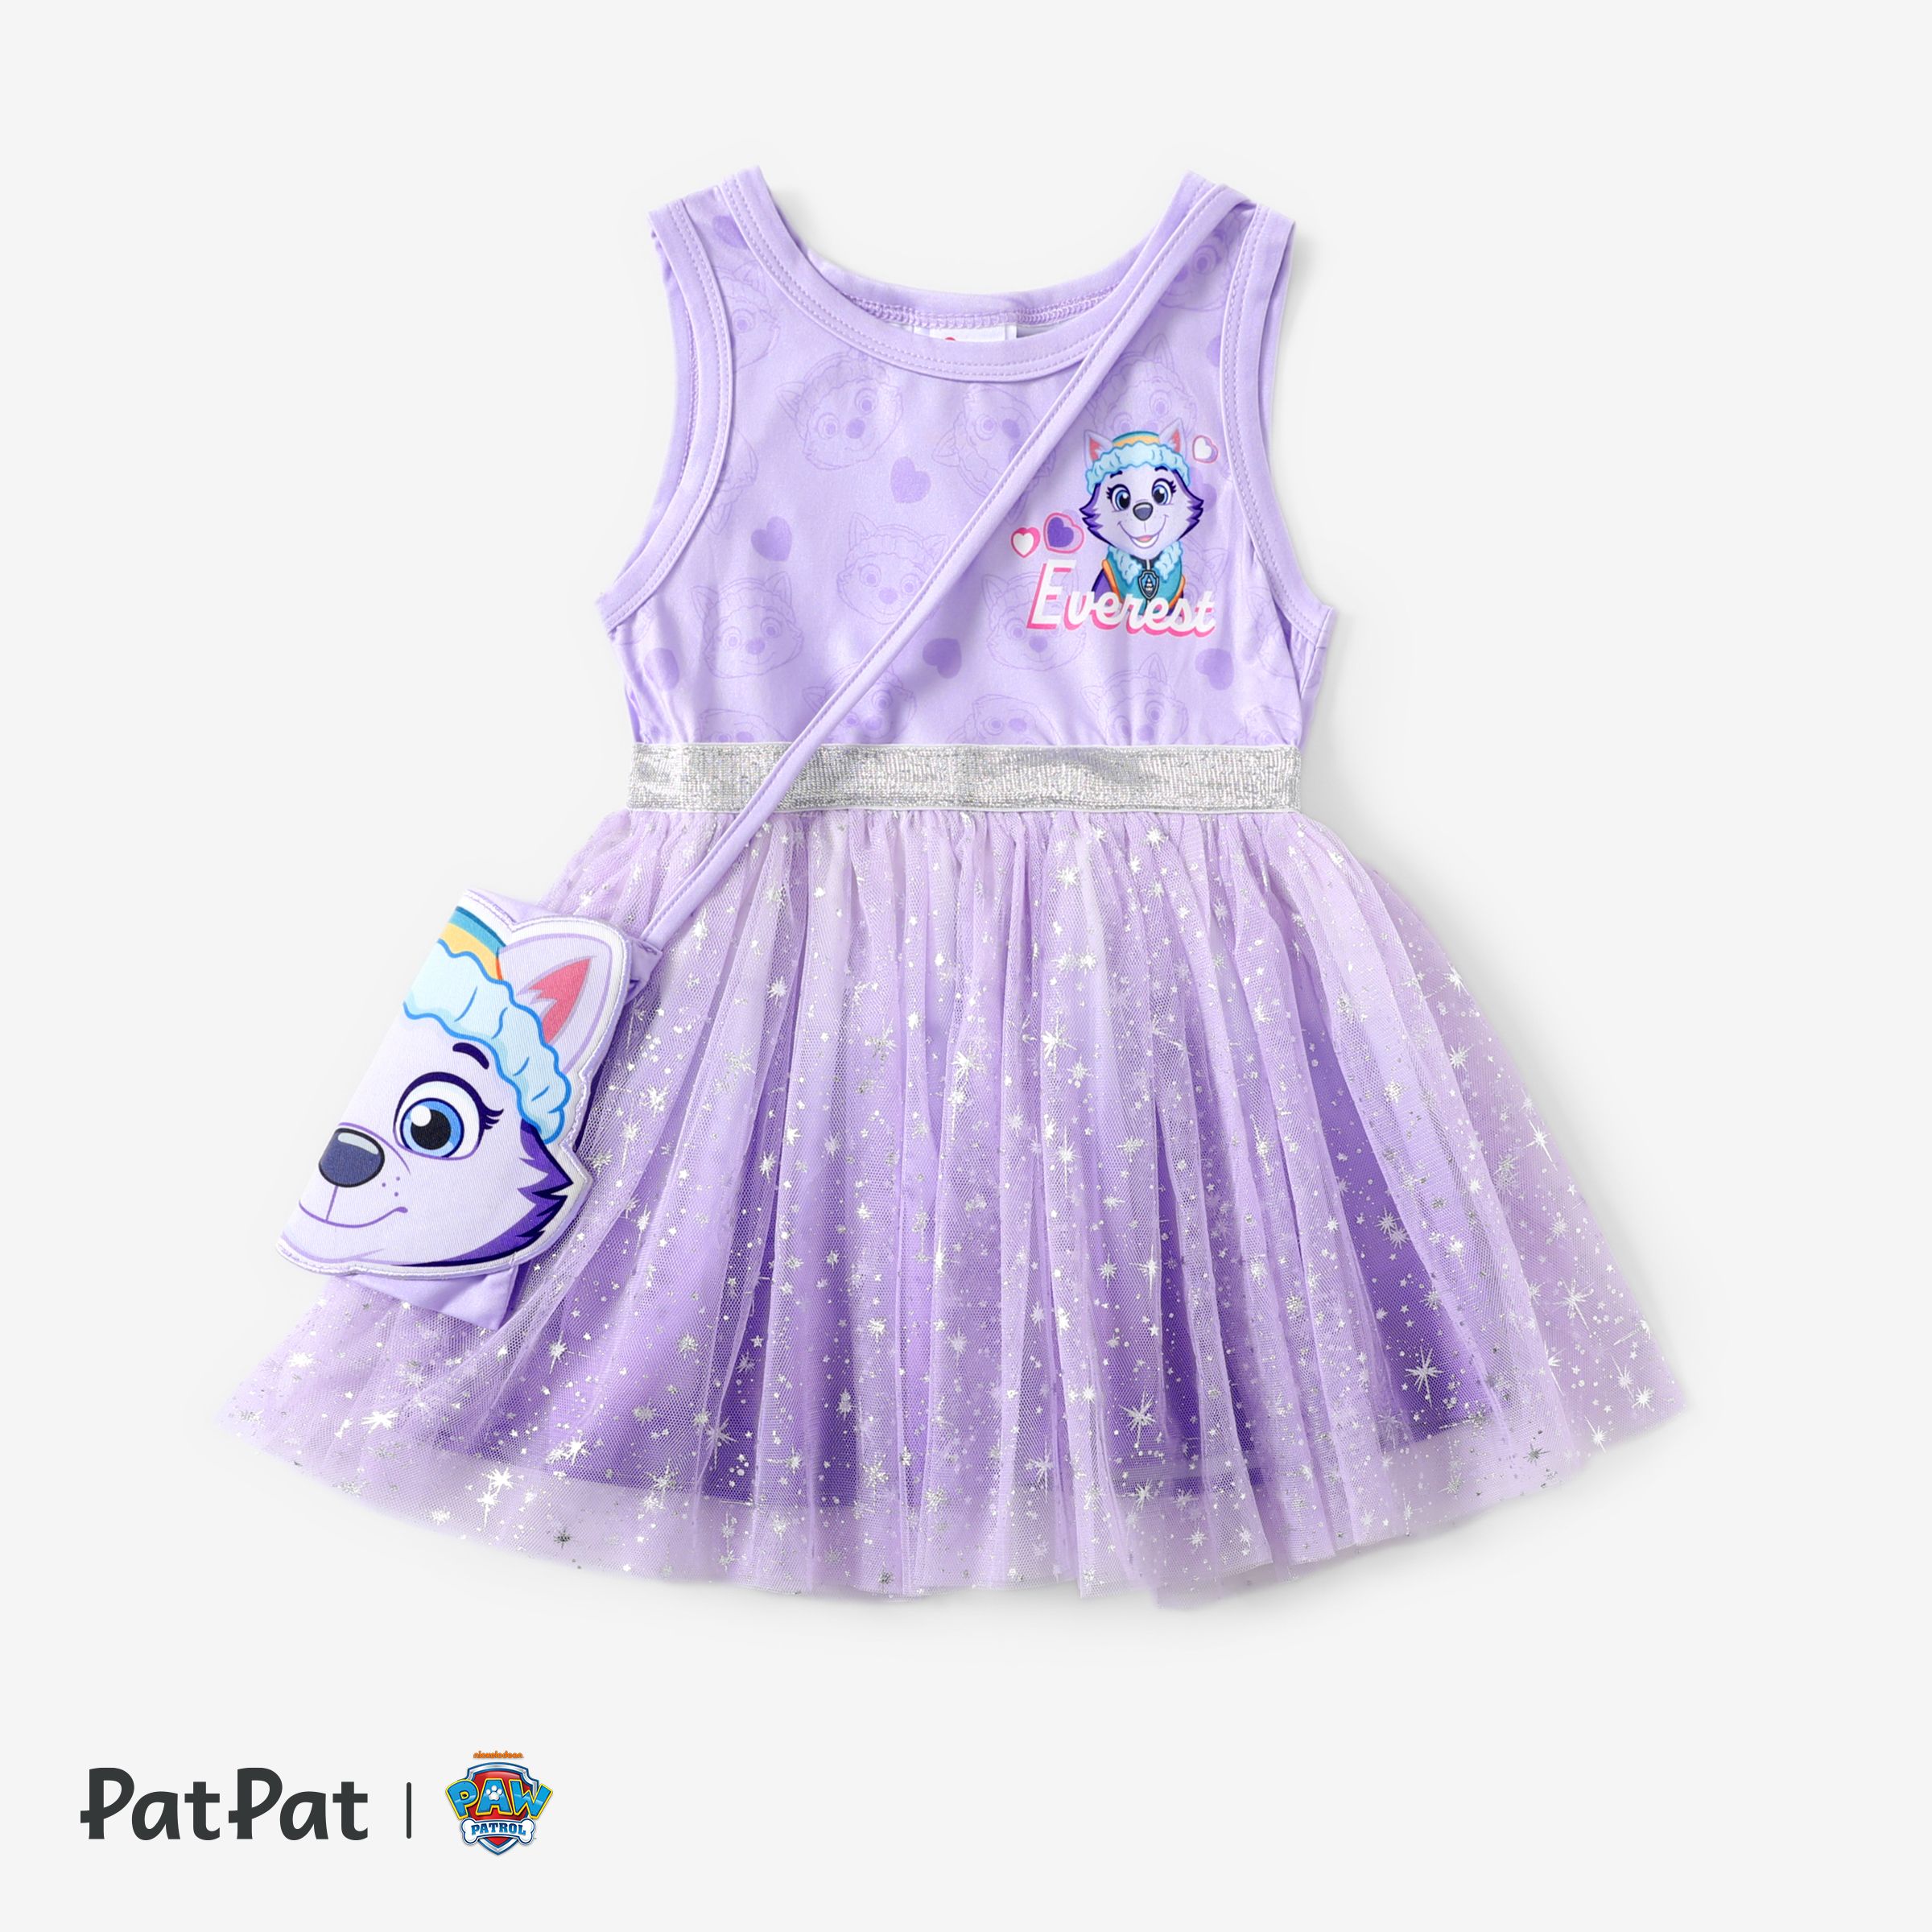 Paw Patrol Toddler Girls 2pcs Character Print Floral Sparkle Tulle Dress with Lovely Skye/Everest Ba